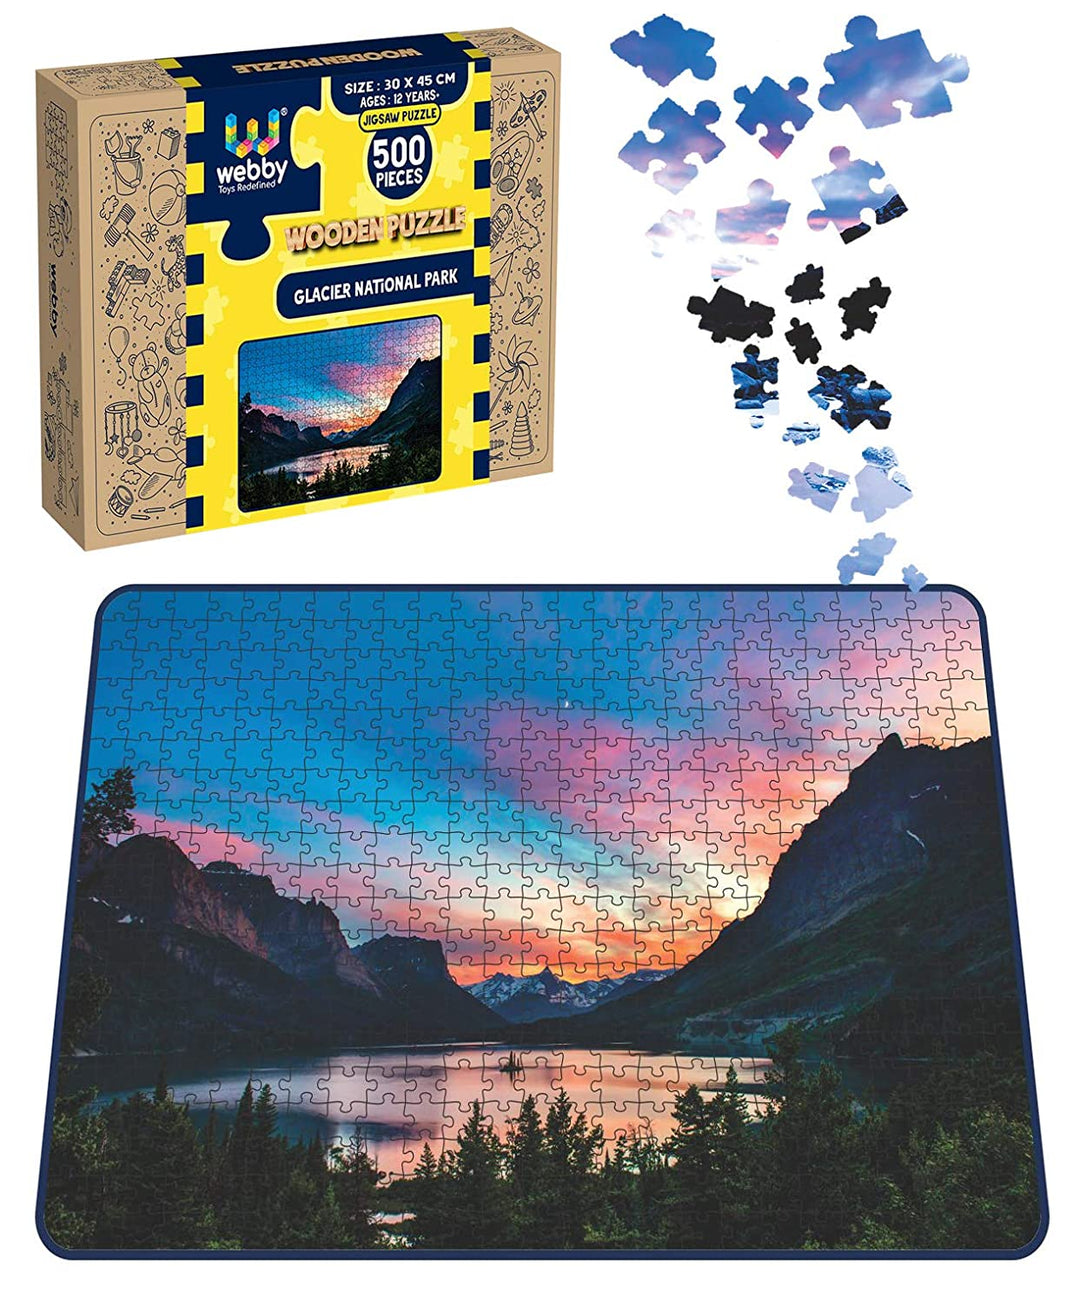 Webby Glacier National Park Wooden Jigsaw Puzzle, 500 pieces